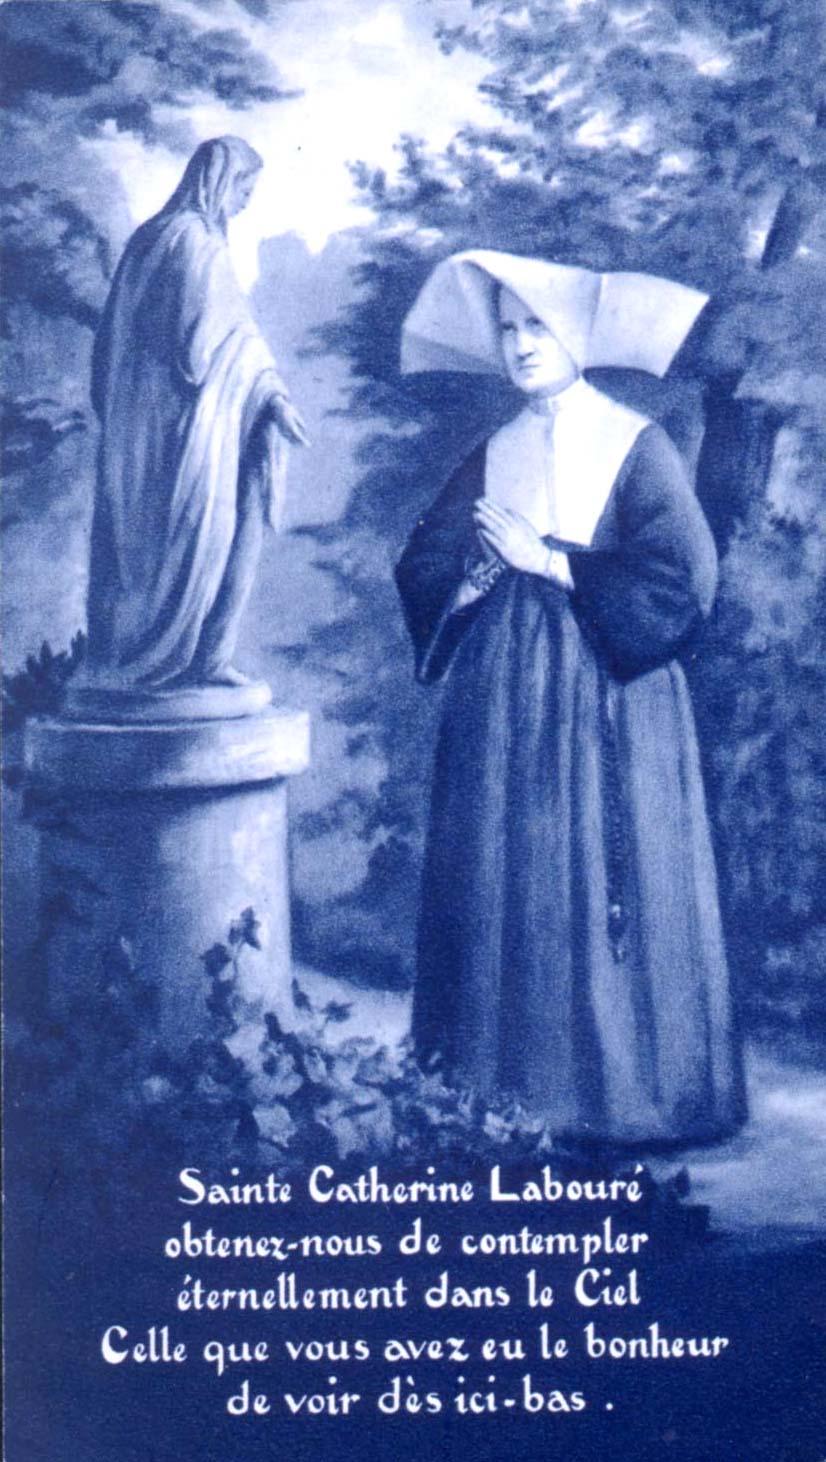 46-Year Secret St. Catherine Labouré was blessed with apparitions of Mary Immaculate, to which we owe the famous Miraculous Medal.